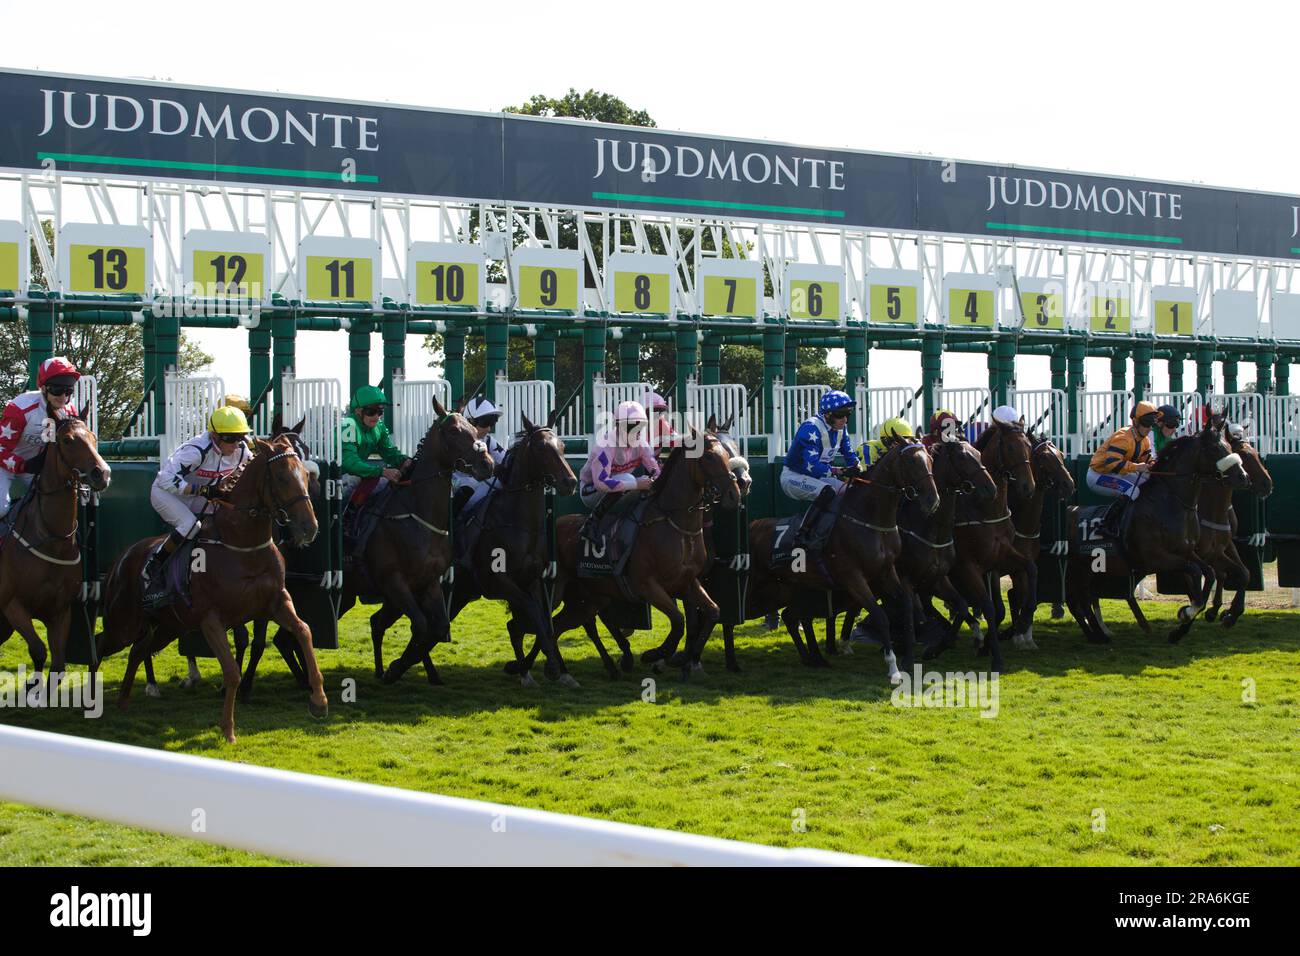 Jockeys and their horses leaving the starting gates during the Juddmonte British EBF Fillies' Restricted Novice Stakes race at York. Stock Photo